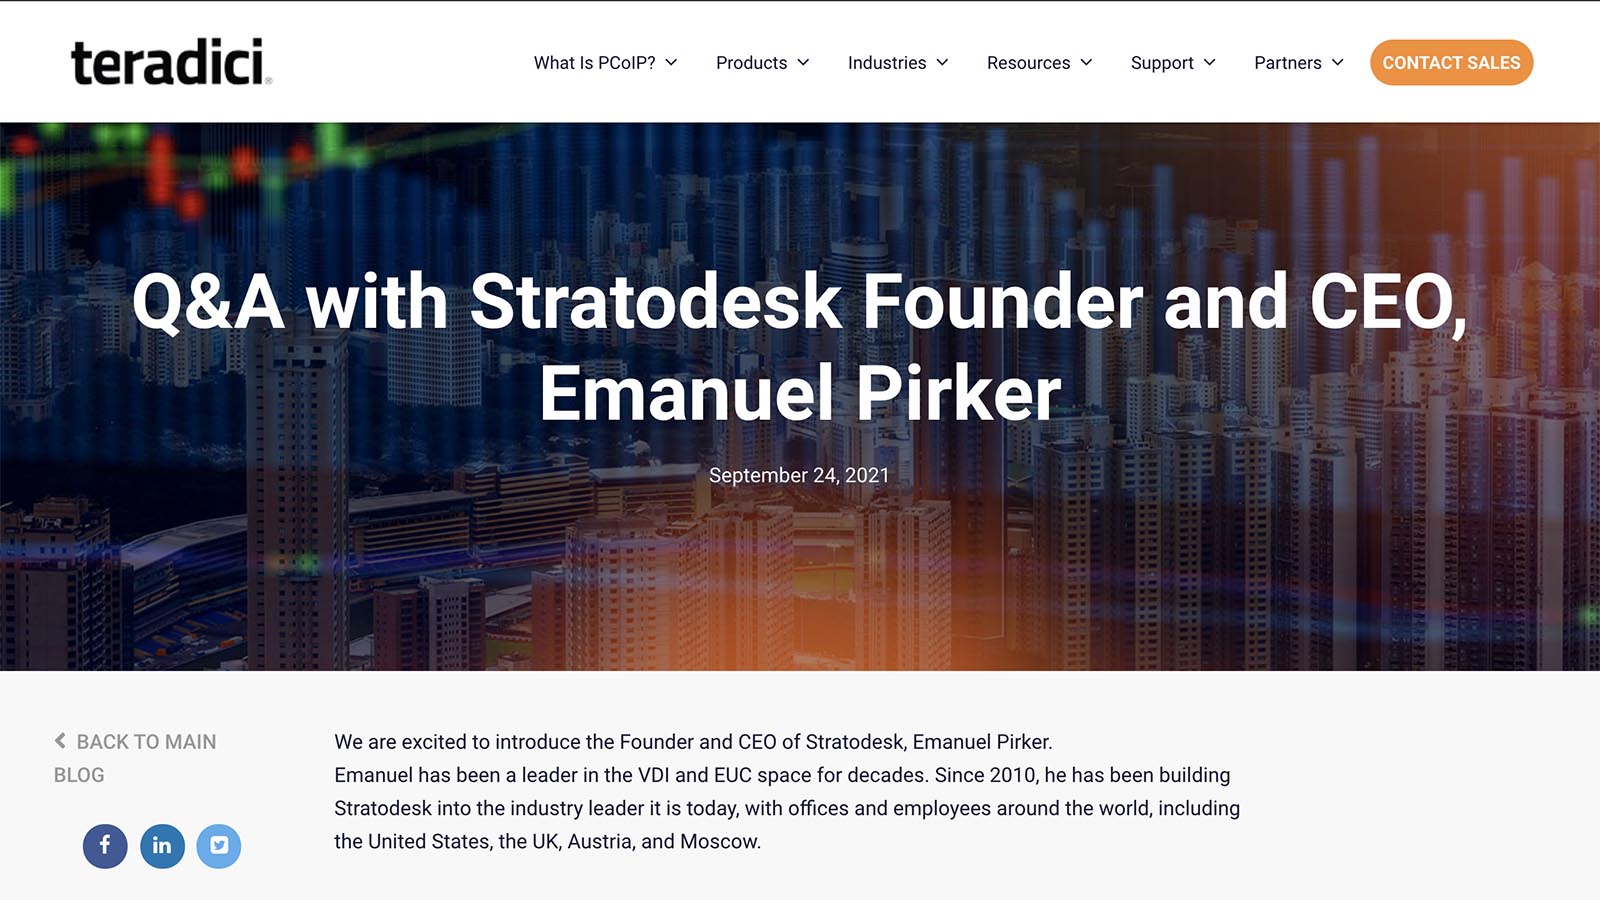 Teradici Q&A with Stratodesk Founder and CEO, Emanuel Pirker